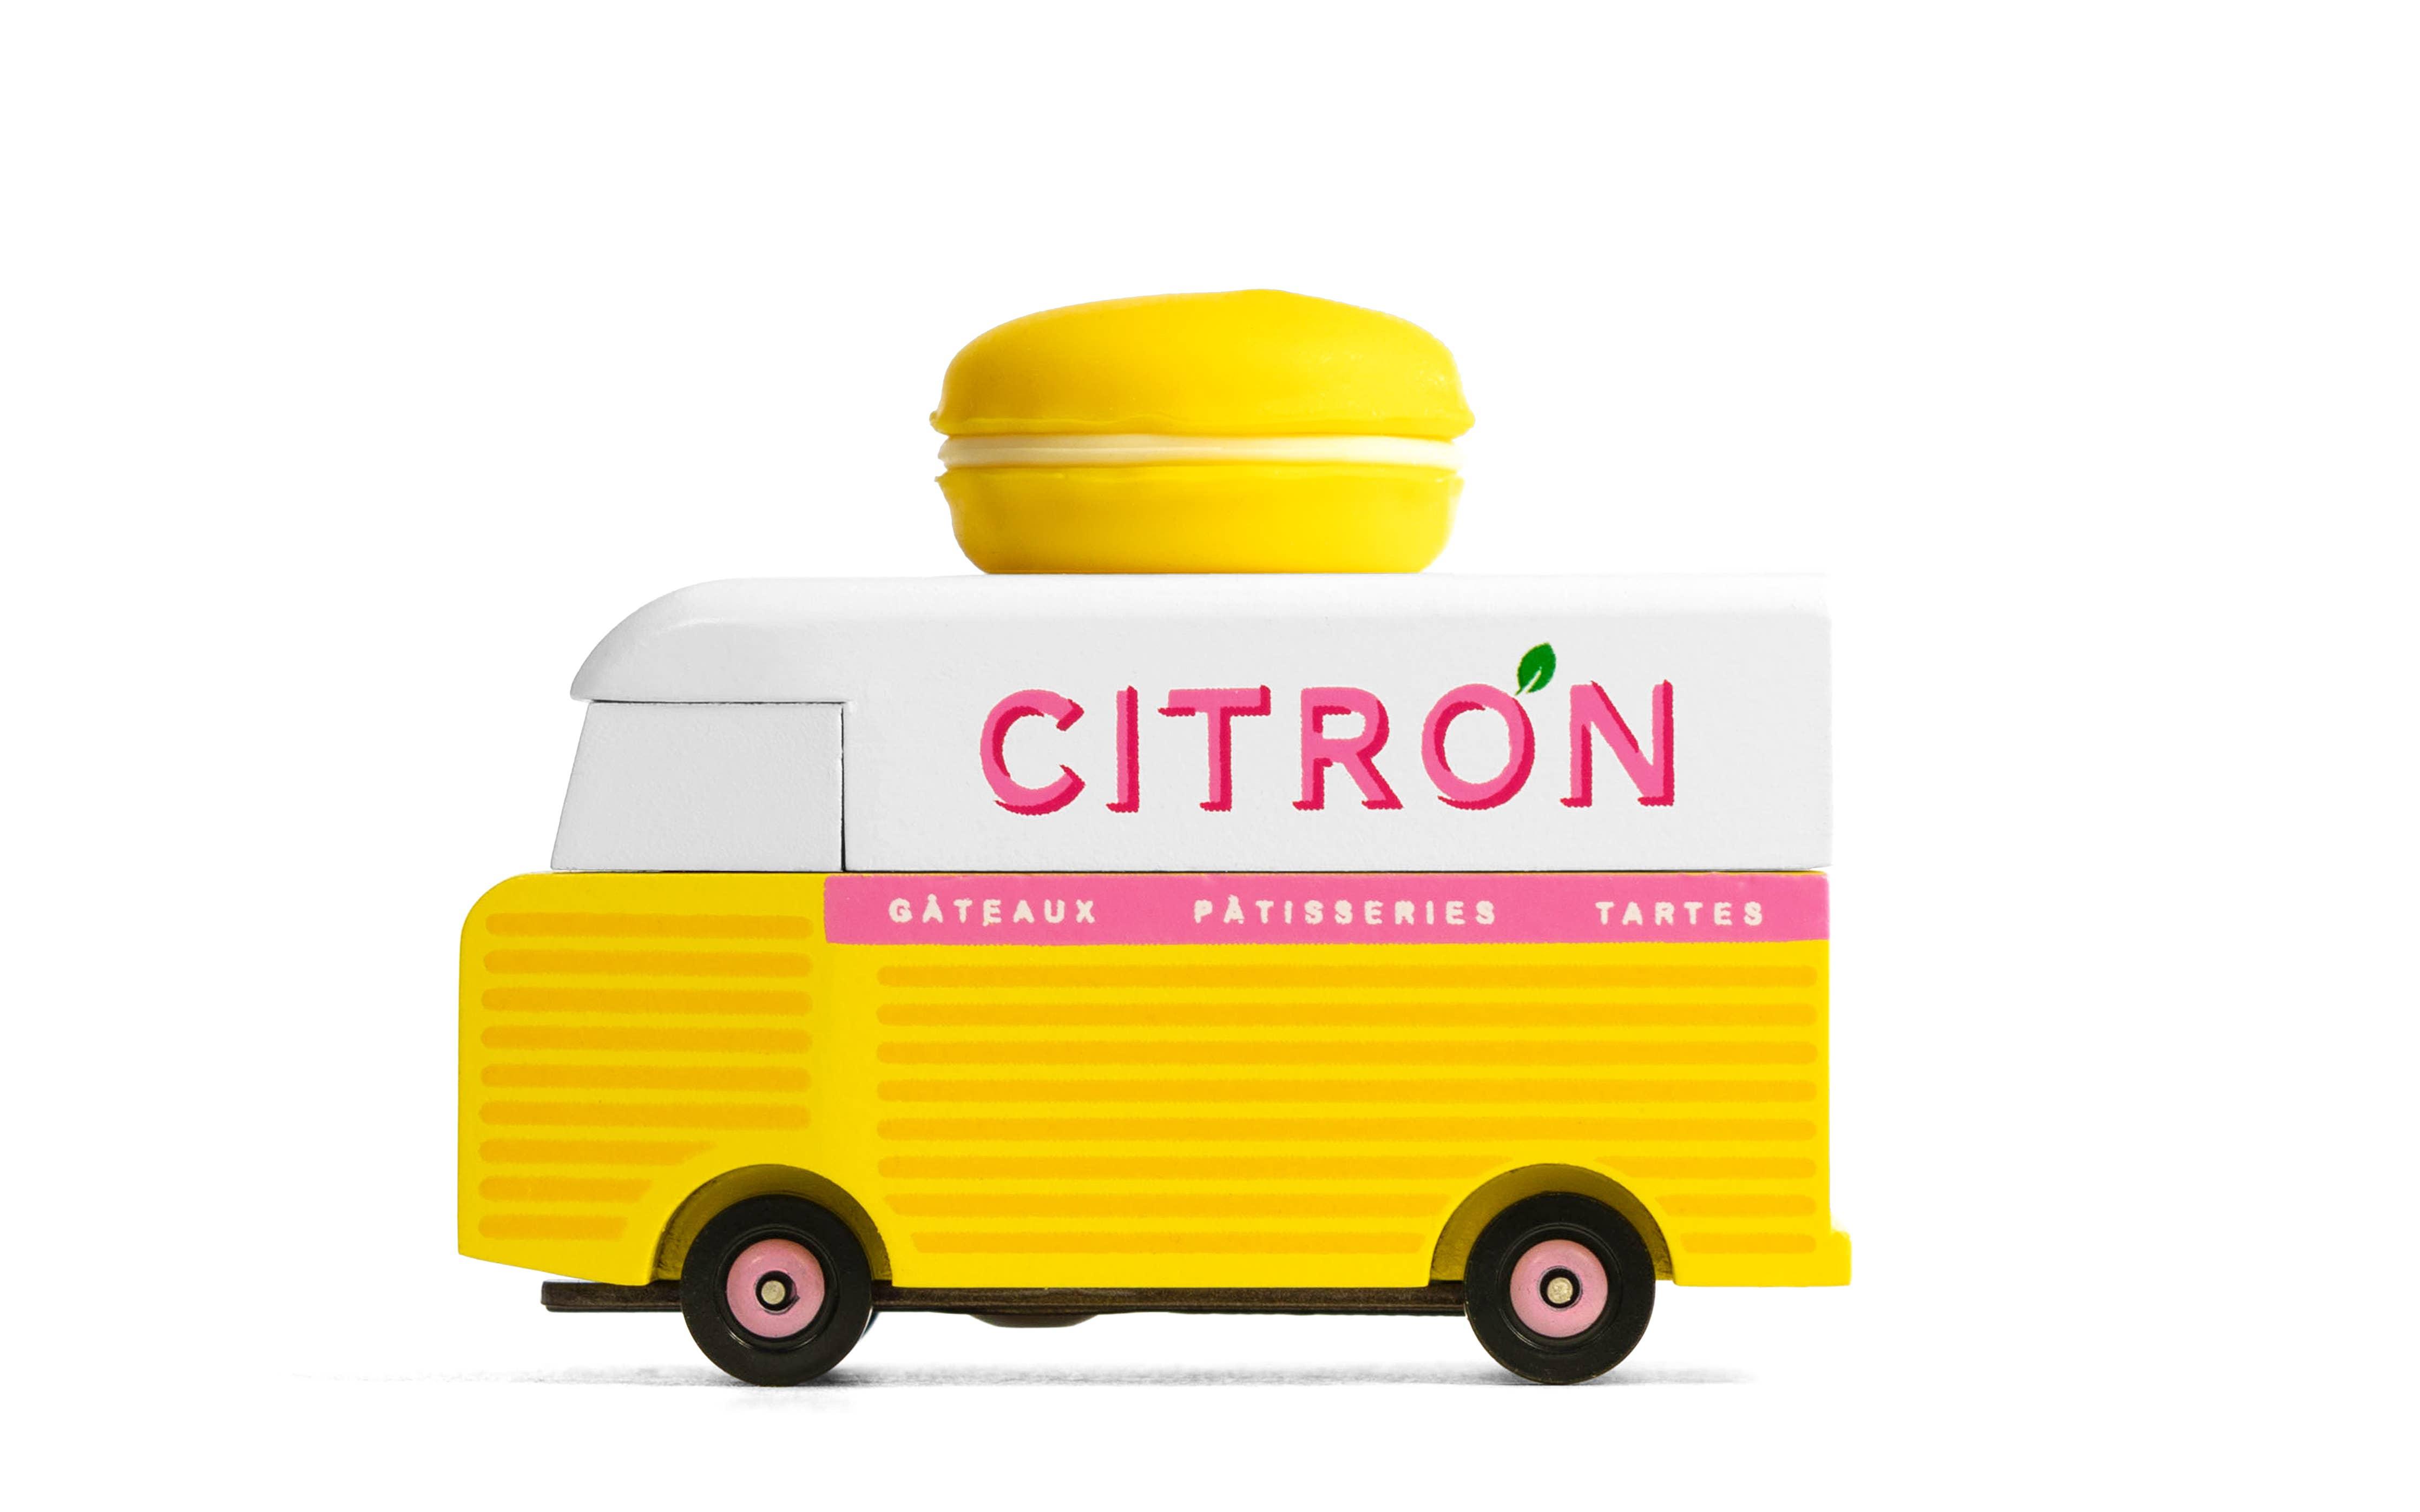 Citron Macaron Van - Why and Whale